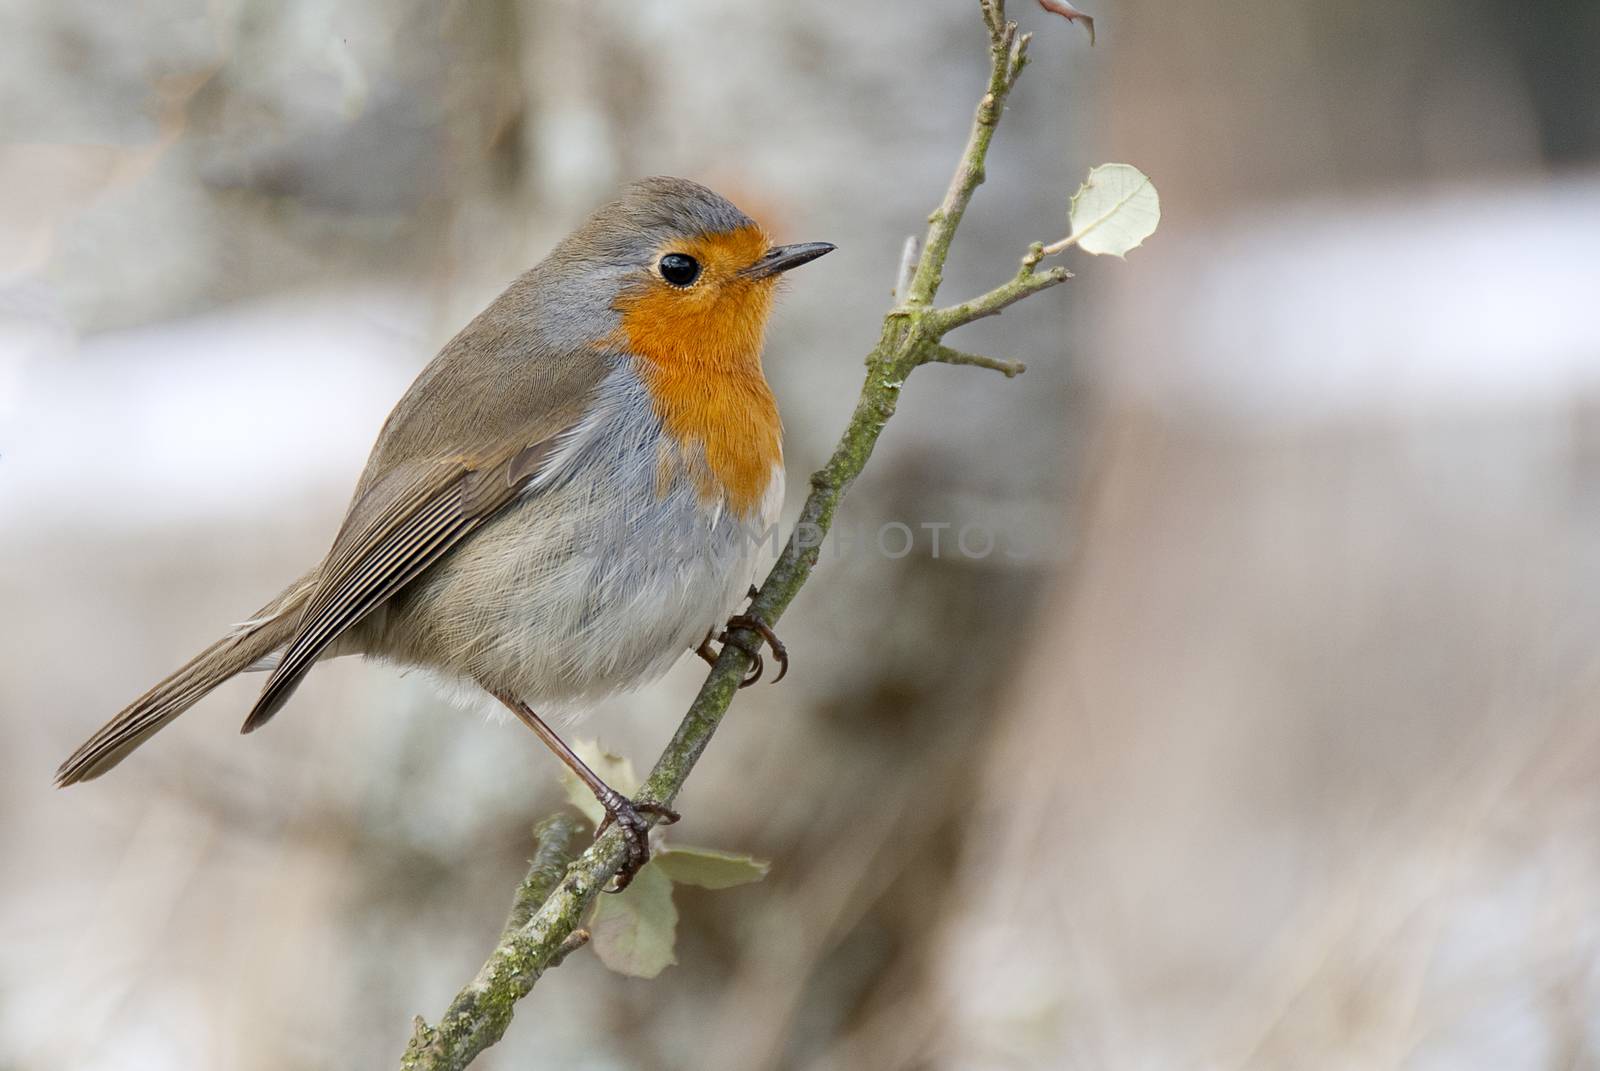 Robin - Erithacus rubecula, standing on a branch